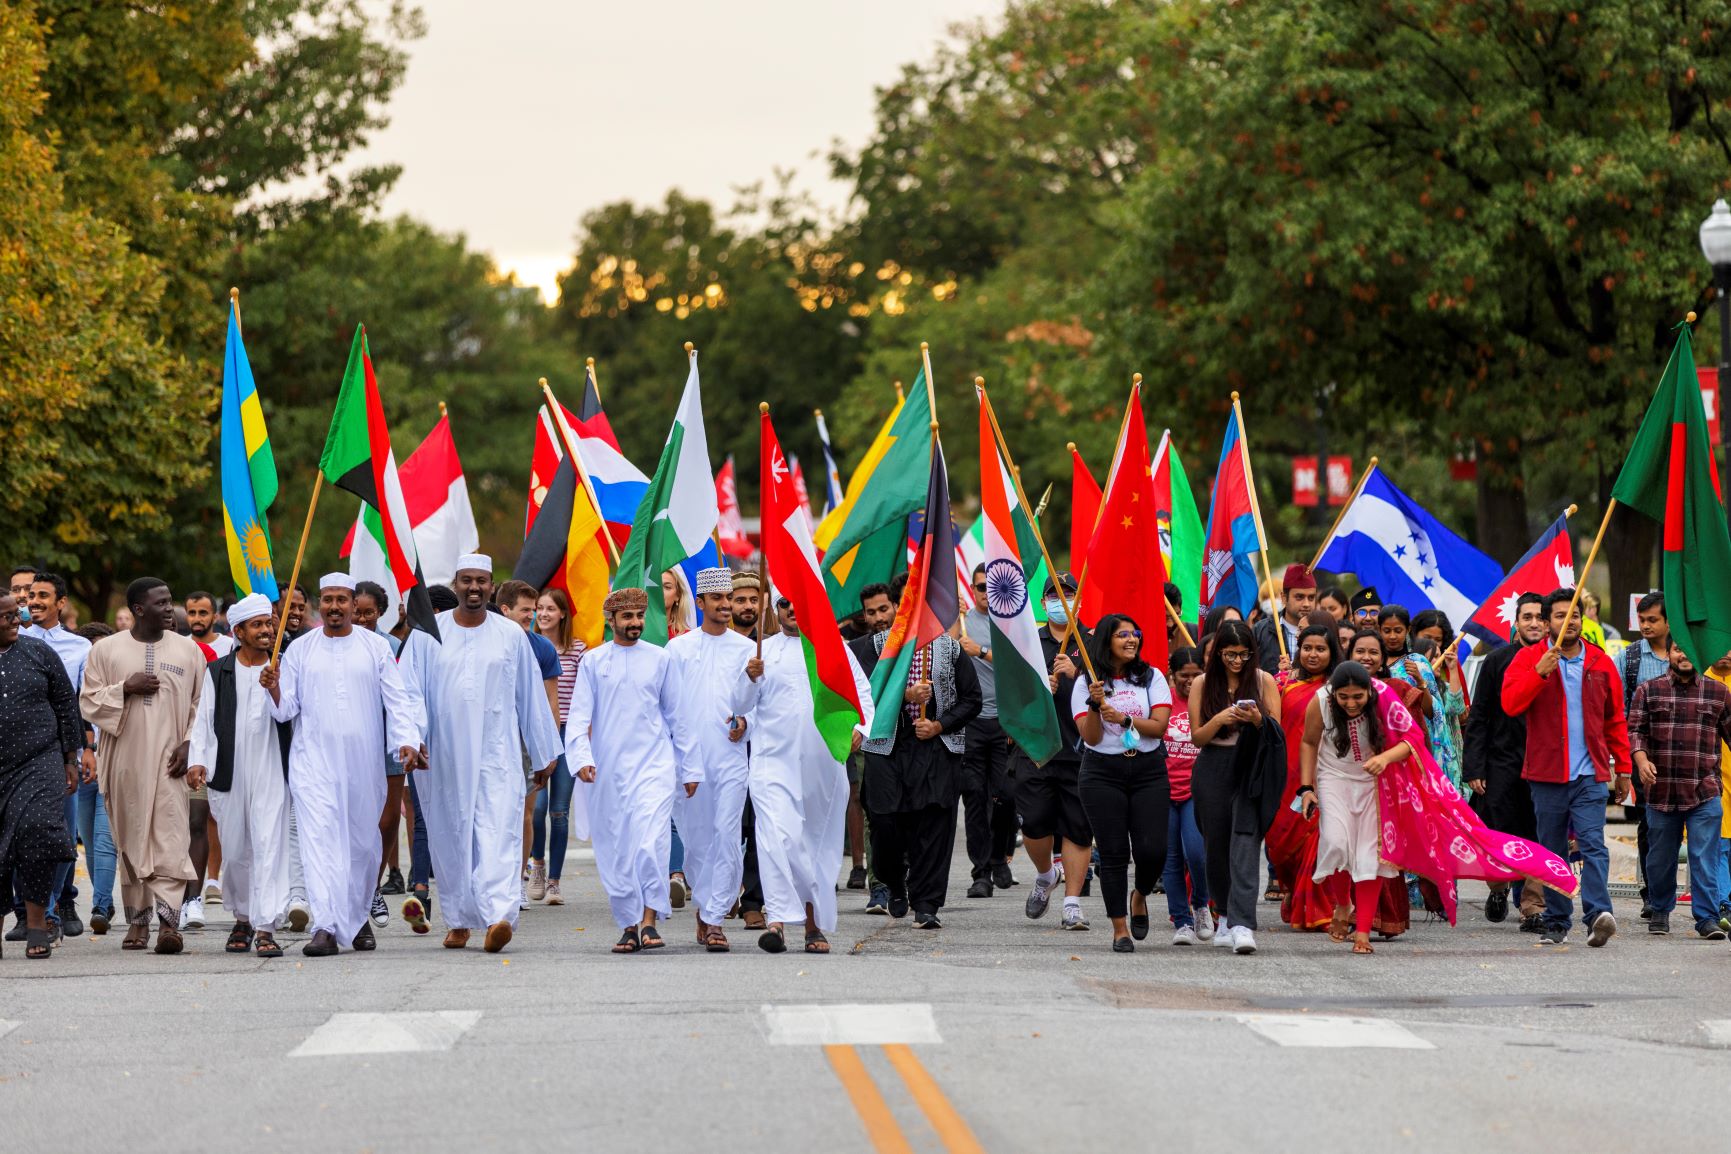 Several international students in national attire carry their national flags during the Homecoming 2021 parade